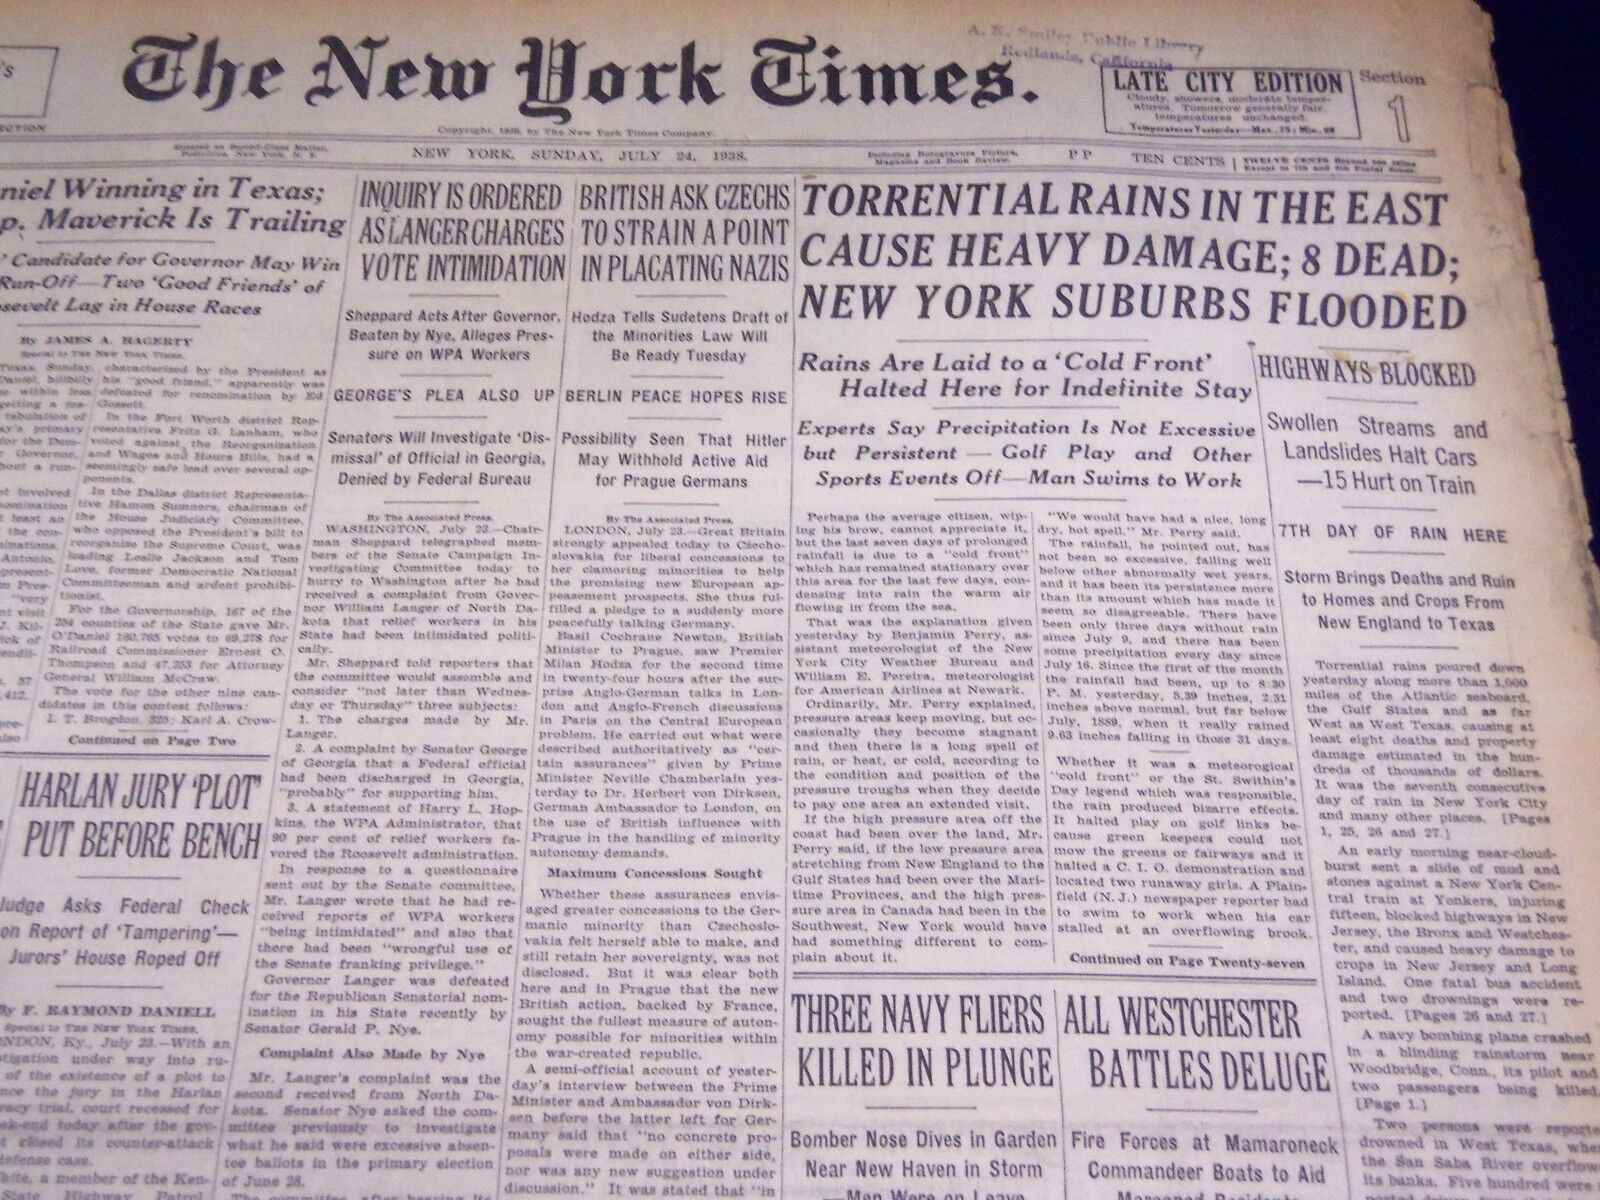 1938 JULY 24 NEW YORK TIMES - NEW YORK SUBURBS FLOODED, 8 DEAD - NT 2391